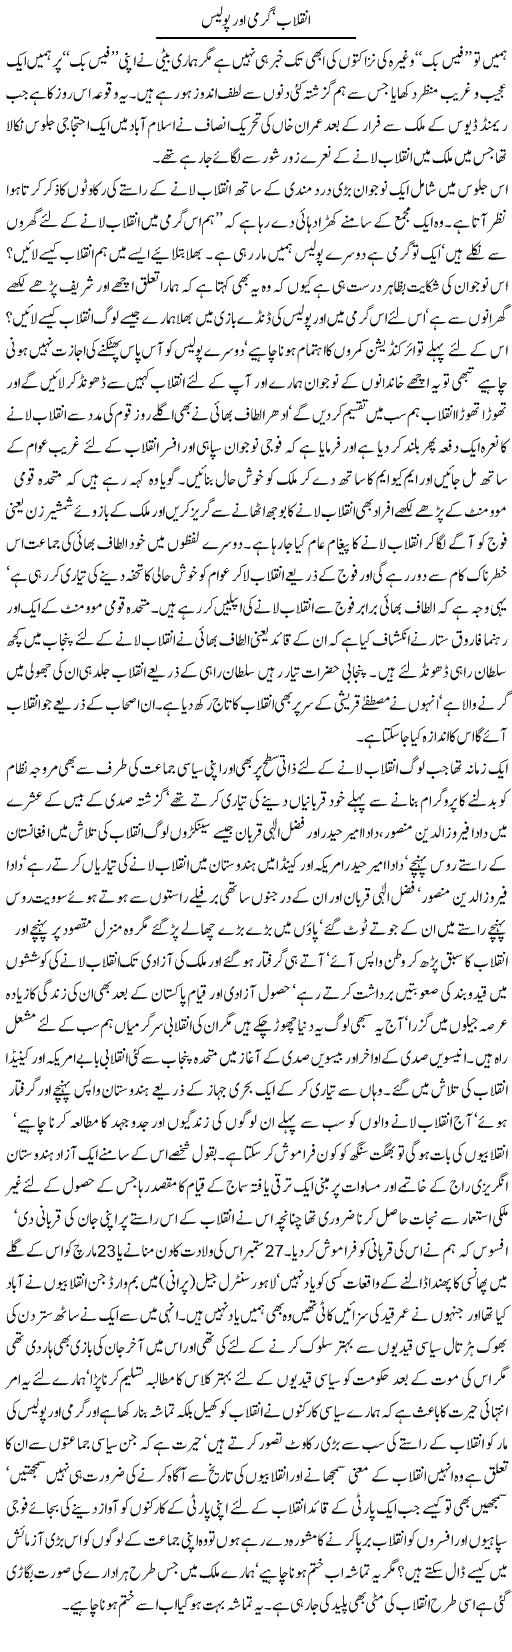 Revolution and Police Express Column Hameed Akhtar 29 March 2011